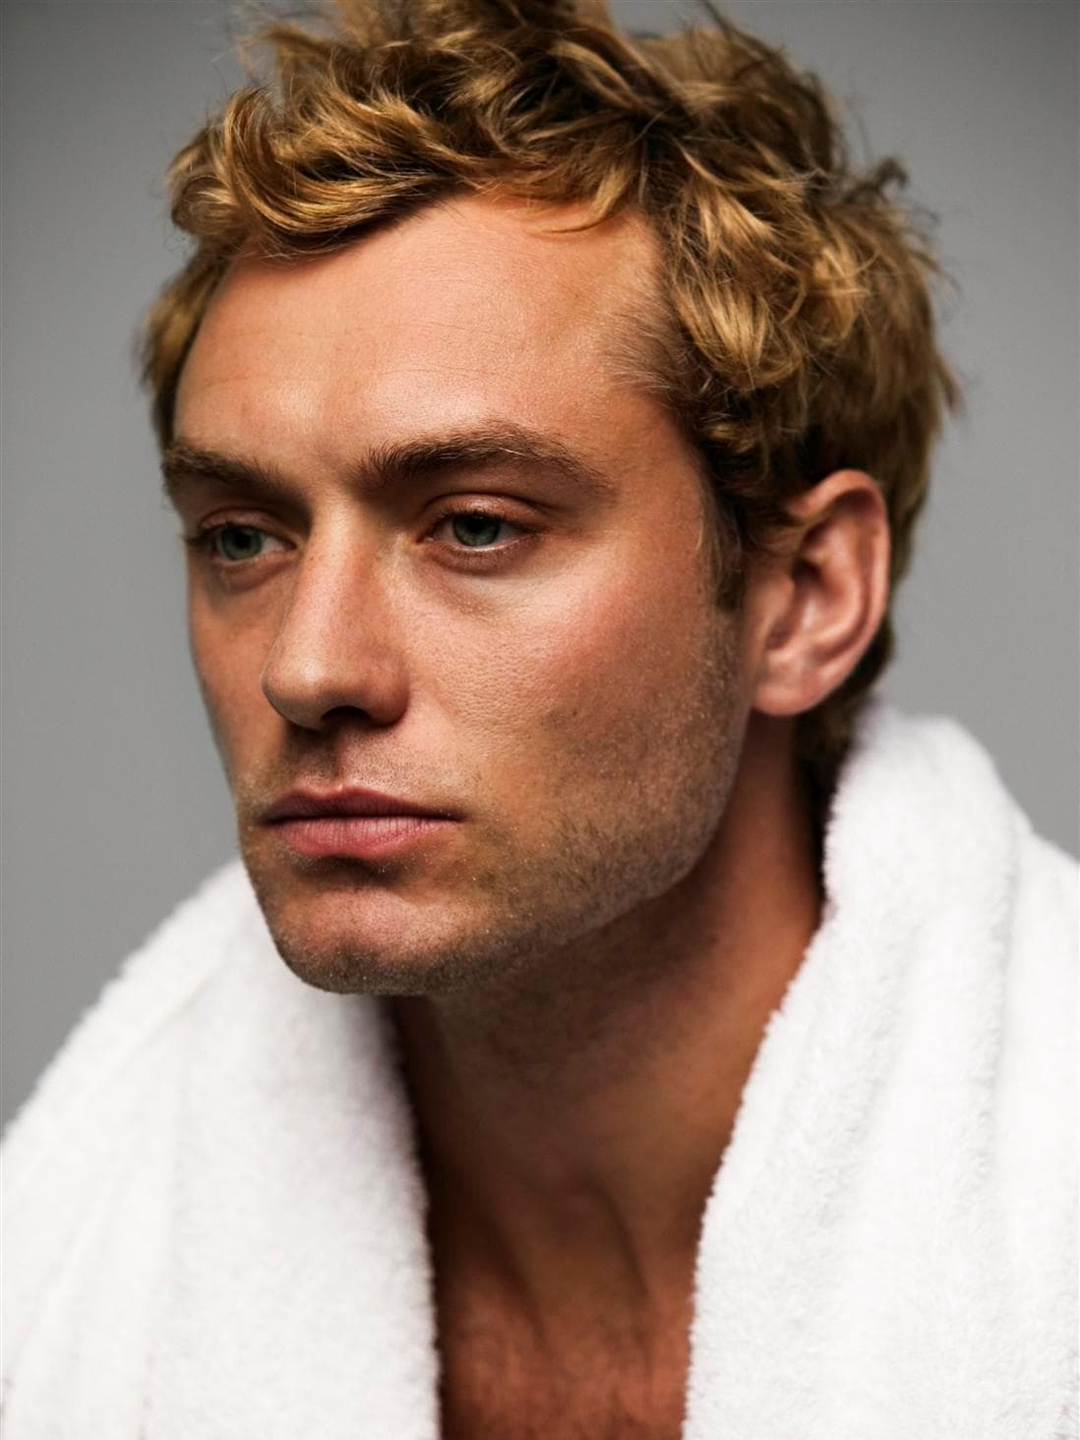 Jude Law young age